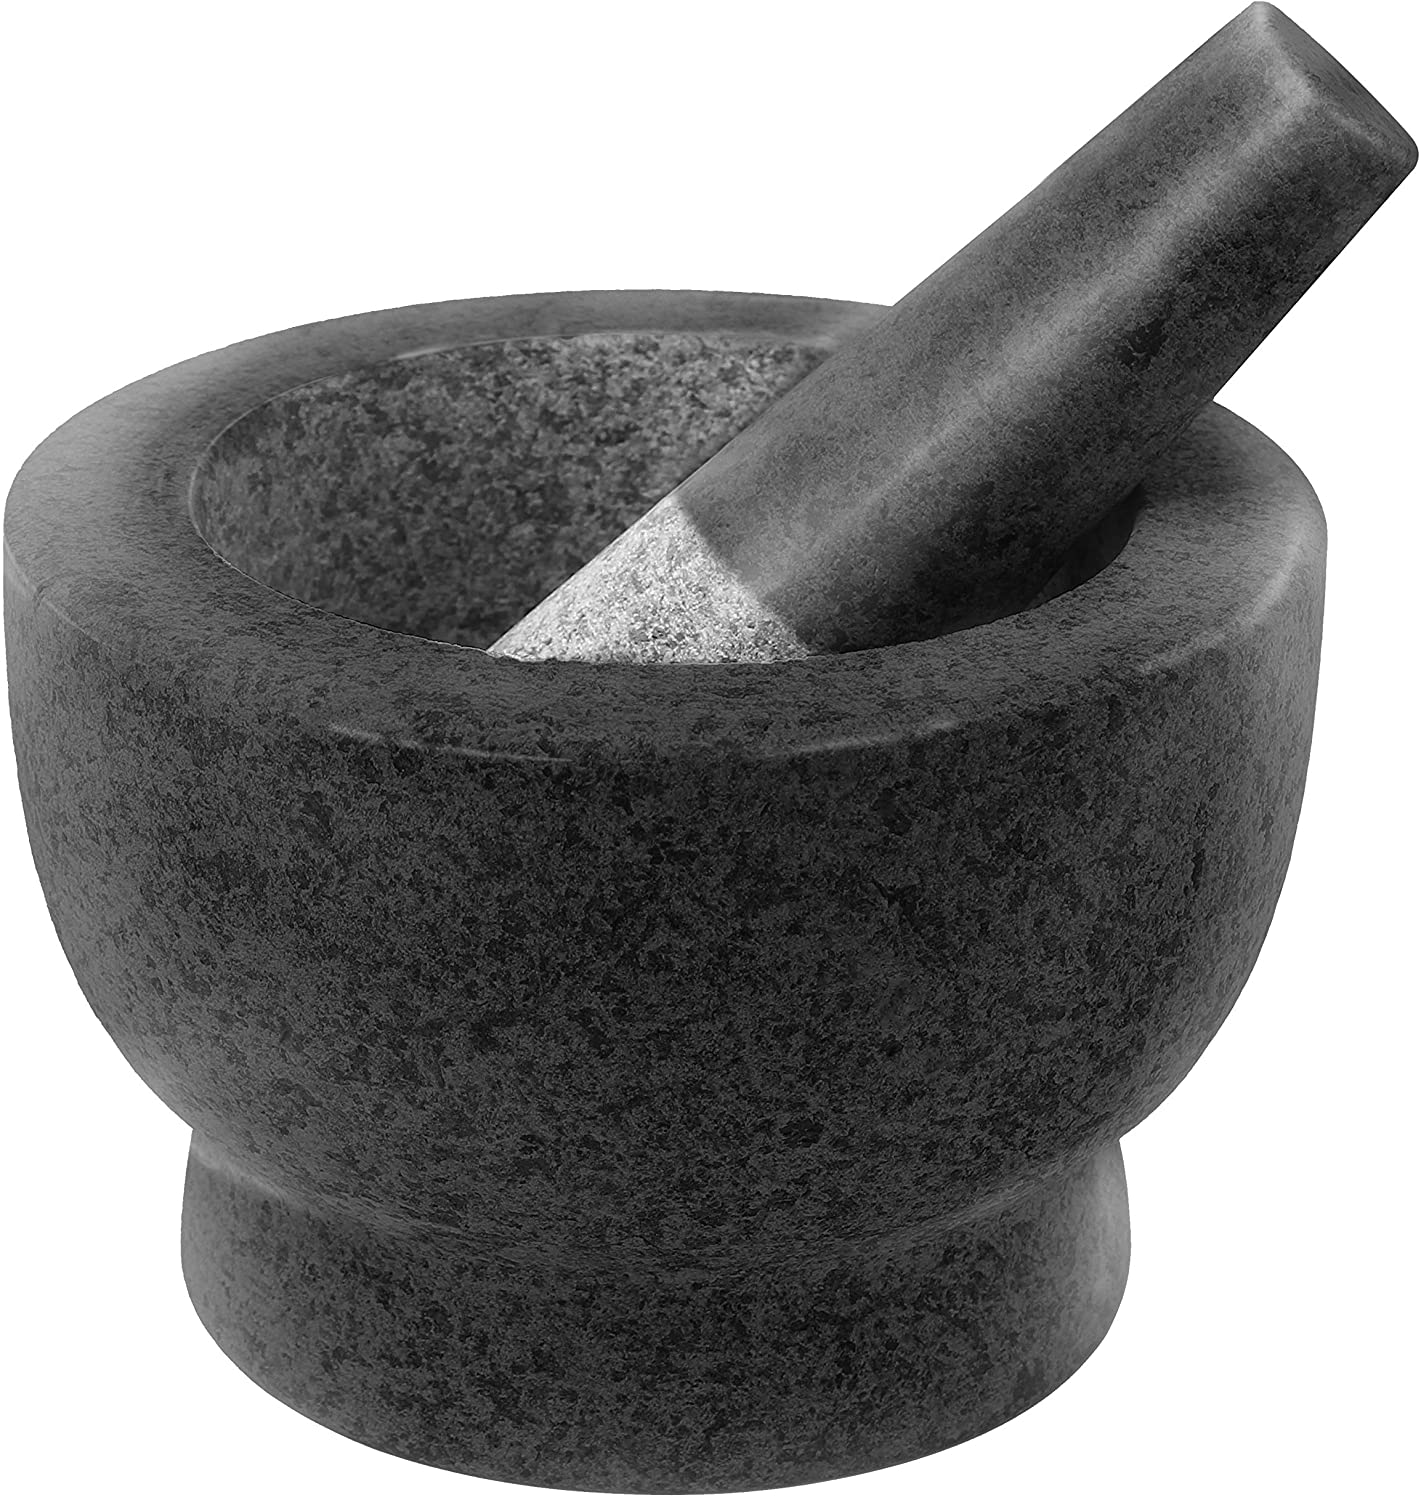 ChefSofi Extra Large 8 inch 5 Cup-Capacity Mortar and Pestle Set